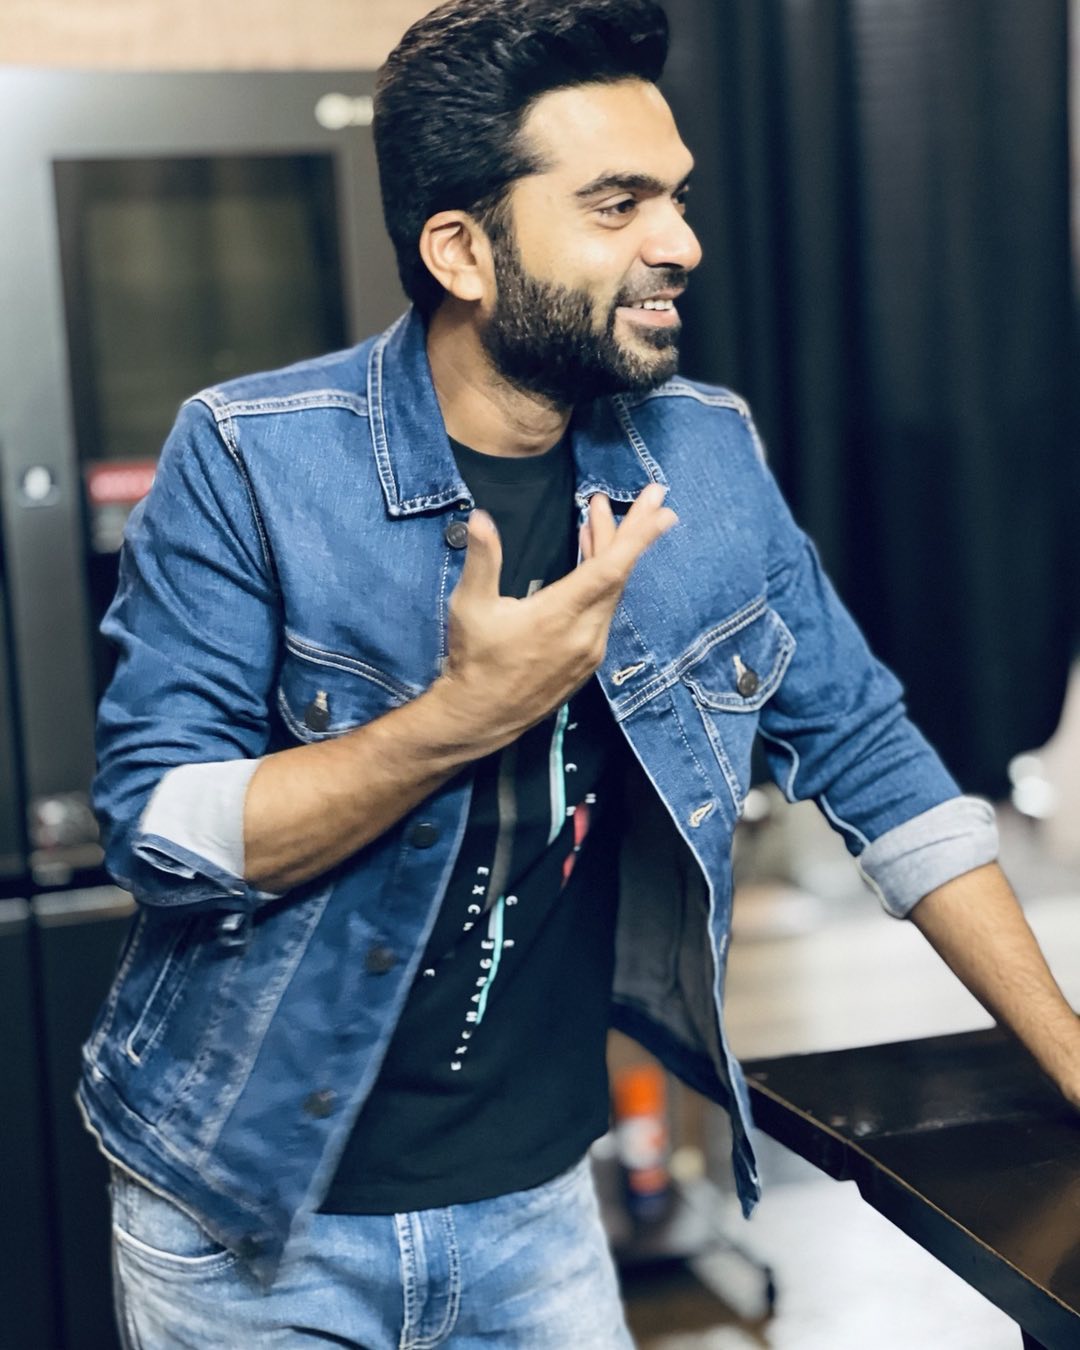 Handsome PHOTOS of Silambarasan TR that will wipe away midweek blues